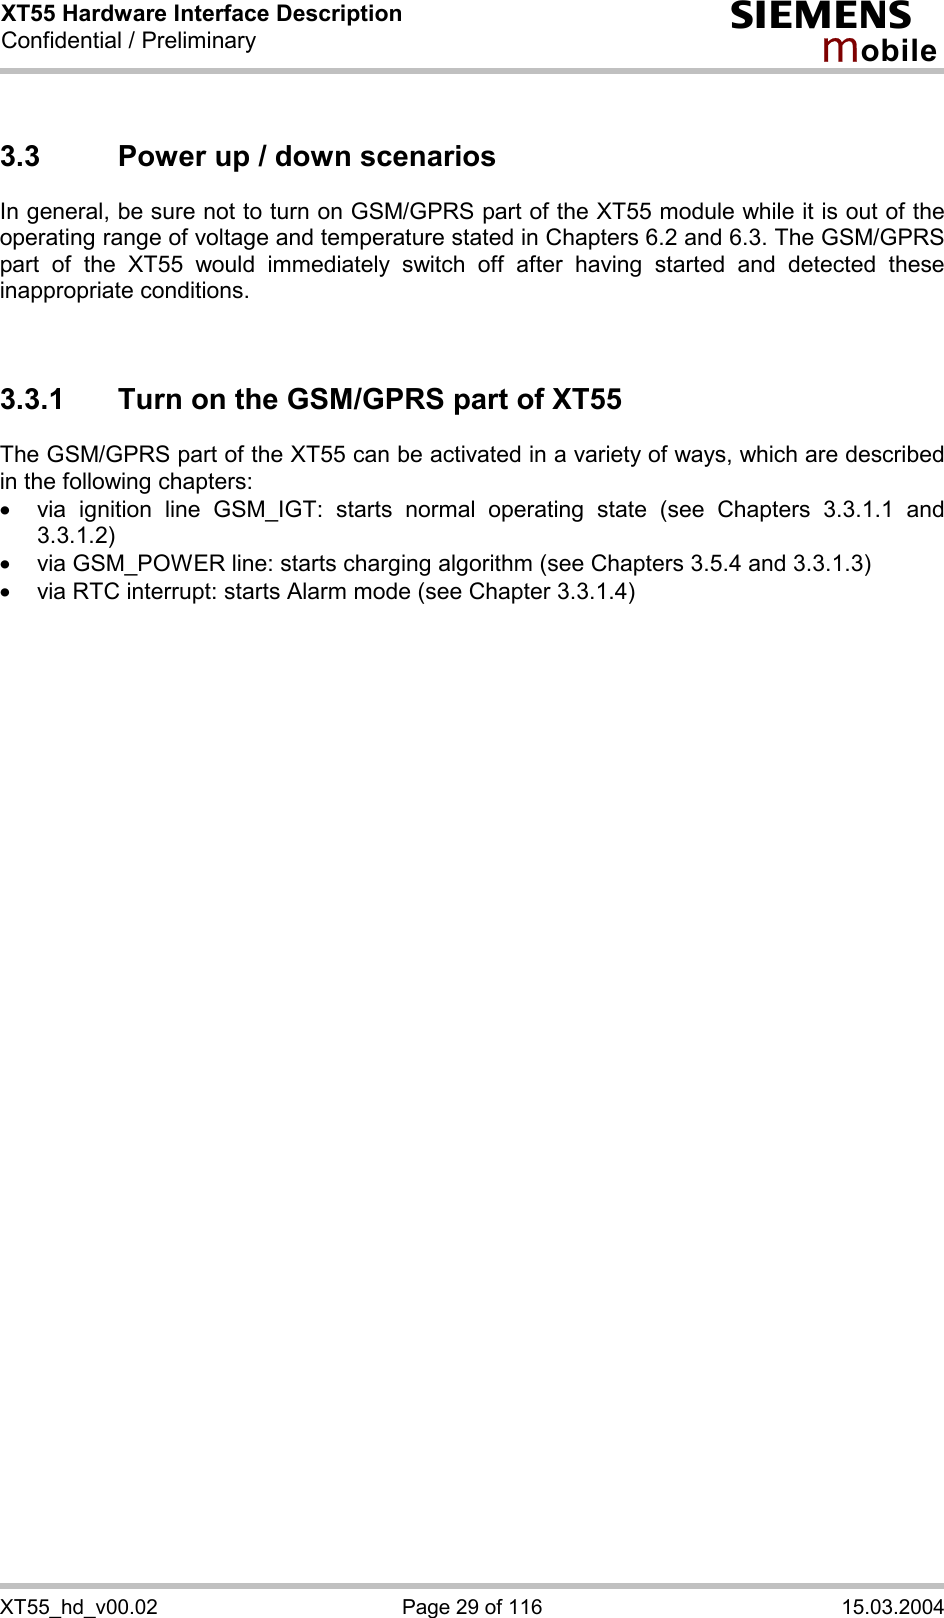 XT55 Hardware Interface Description Confidential / Preliminary s mo b i l e XT55_hd_v00.02  Page 29 of 116  15.03.2004 3.3  Power up / down scenarios In general, be sure not to turn on GSM/GPRS part of the XT55 module while it is out of the operating range of voltage and temperature stated in Chapters 6.2 and 6.3. The GSM/GPRS part of the XT55 would immediately switch off after having started and detected these inappropriate conditions.   3.3.1  Turn on the GSM/GPRS part of XT55 The GSM/GPRS part of the XT55 can be activated in a variety of ways, which are described in the following chapters: ·  via ignition line GSM_IGT: starts normal operating state (see Chapters 3.3.1.1 and 3.3.1.2) ·  via GSM_POWER line: starts charging algorithm (see Chapters 3.5.4 and 3.3.1.3) ·  via RTC interrupt: starts Alarm mode (see Chapter 3.3.1.4)  